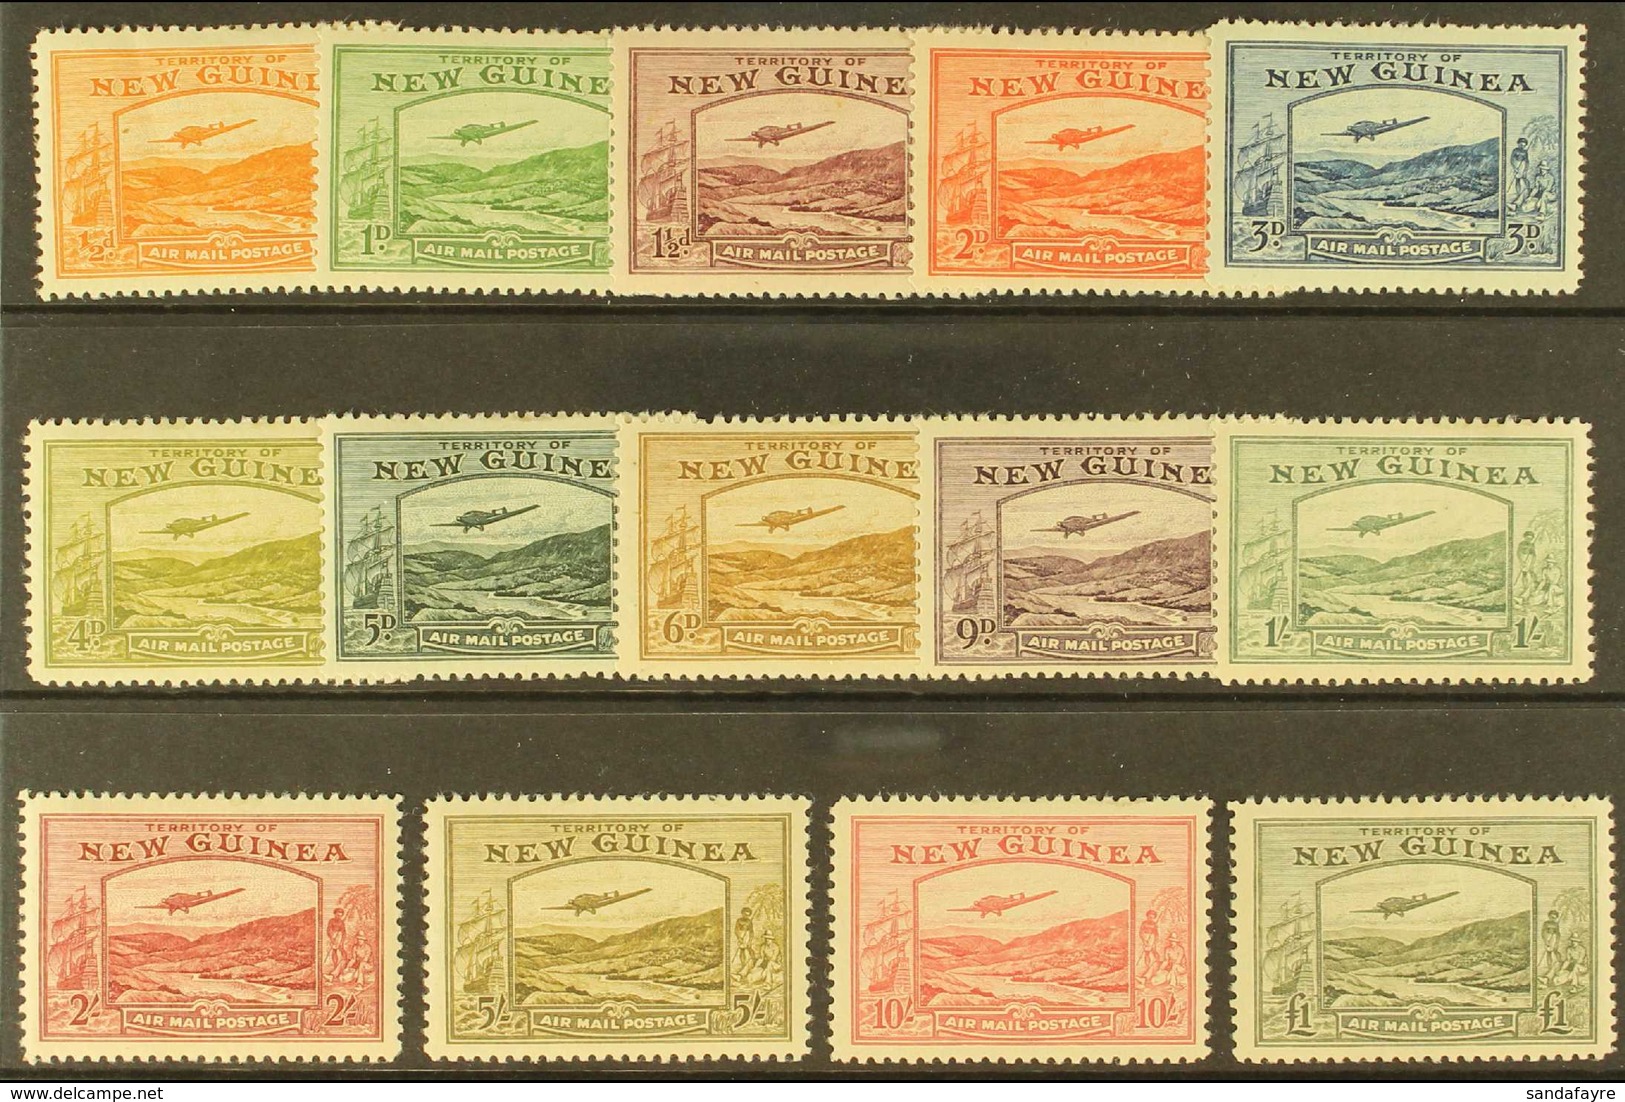 1939 AIRMAILS Bulolo Goldfields Set Inscribed "AIRMAIL POSTAGE," SG 212/25, Mint With Gently Toned Gum, Cat £1100 (14 St - Papua Nuova Guinea